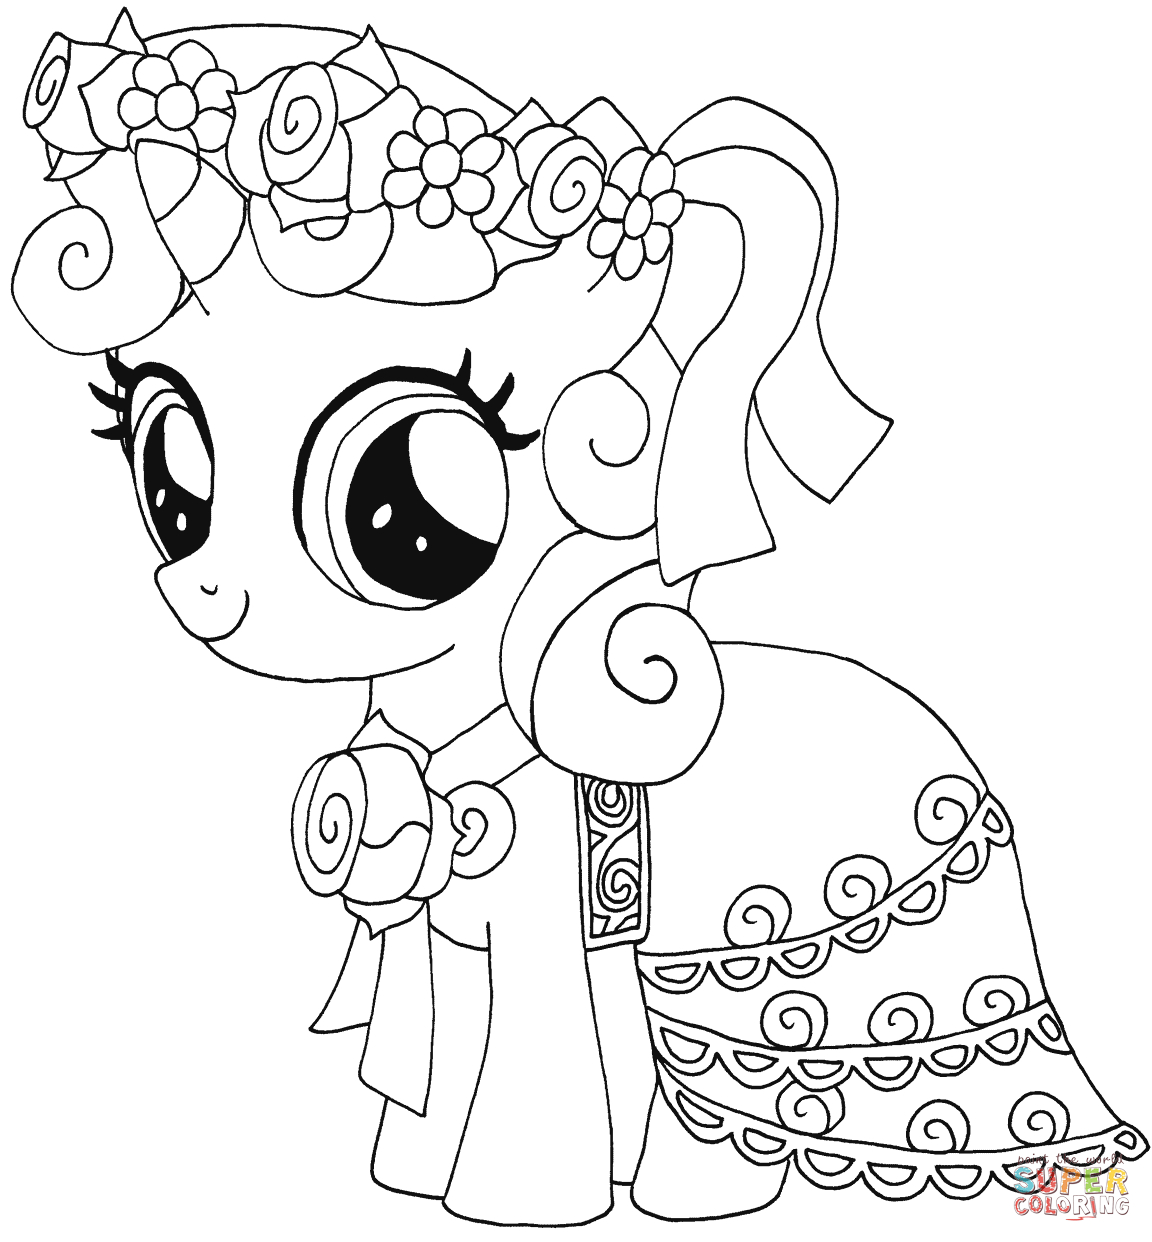 My Little Pony Coloring Pages | Free Coloring Pages - Free Printable Coloring Pages Of My Little Pony